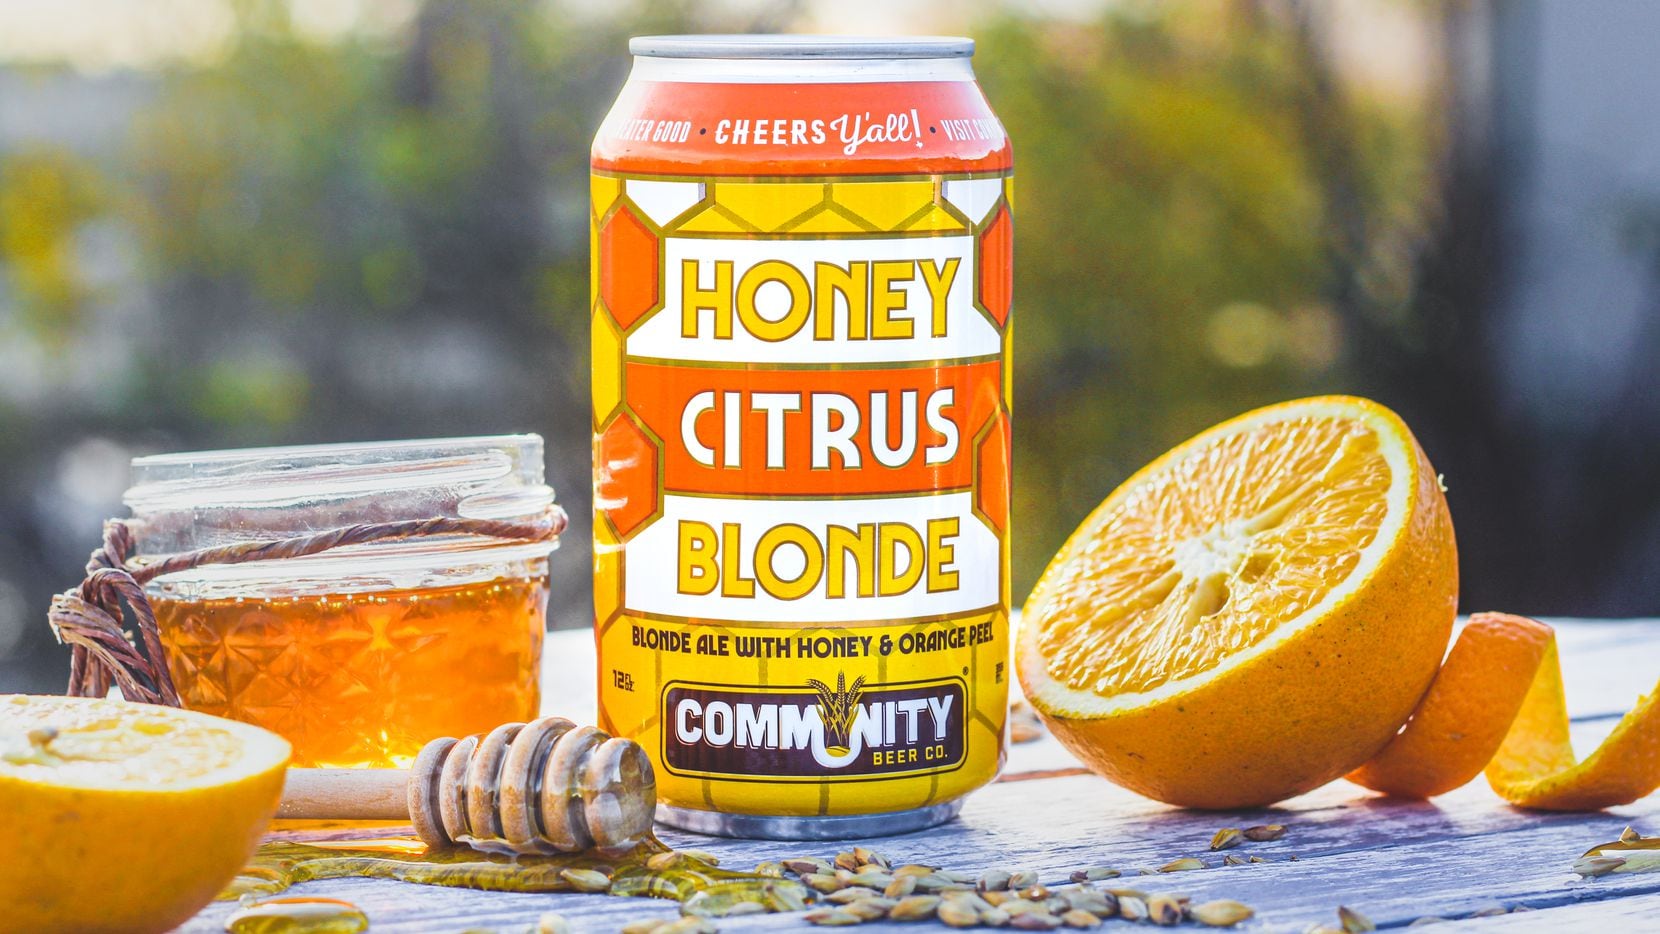 The new Honey Citrus Blonde from Community Beer Co.